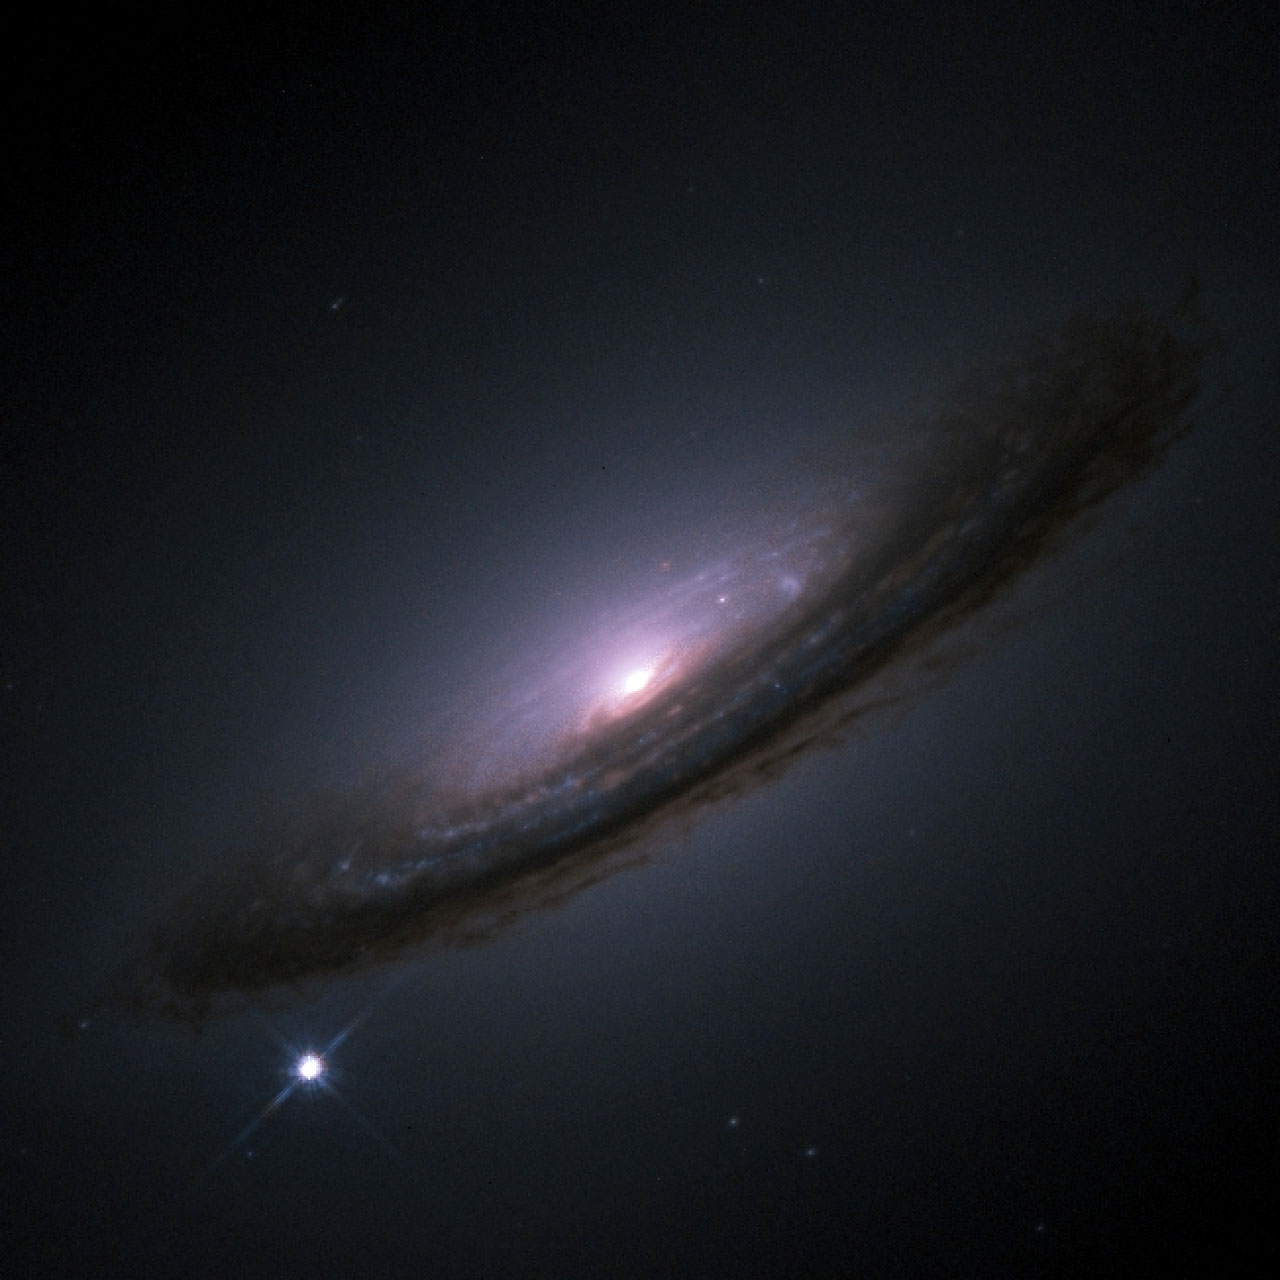 Hubble Space Telescope image of supernova 1994D in galaxy NGC 4526. By Wikipedia